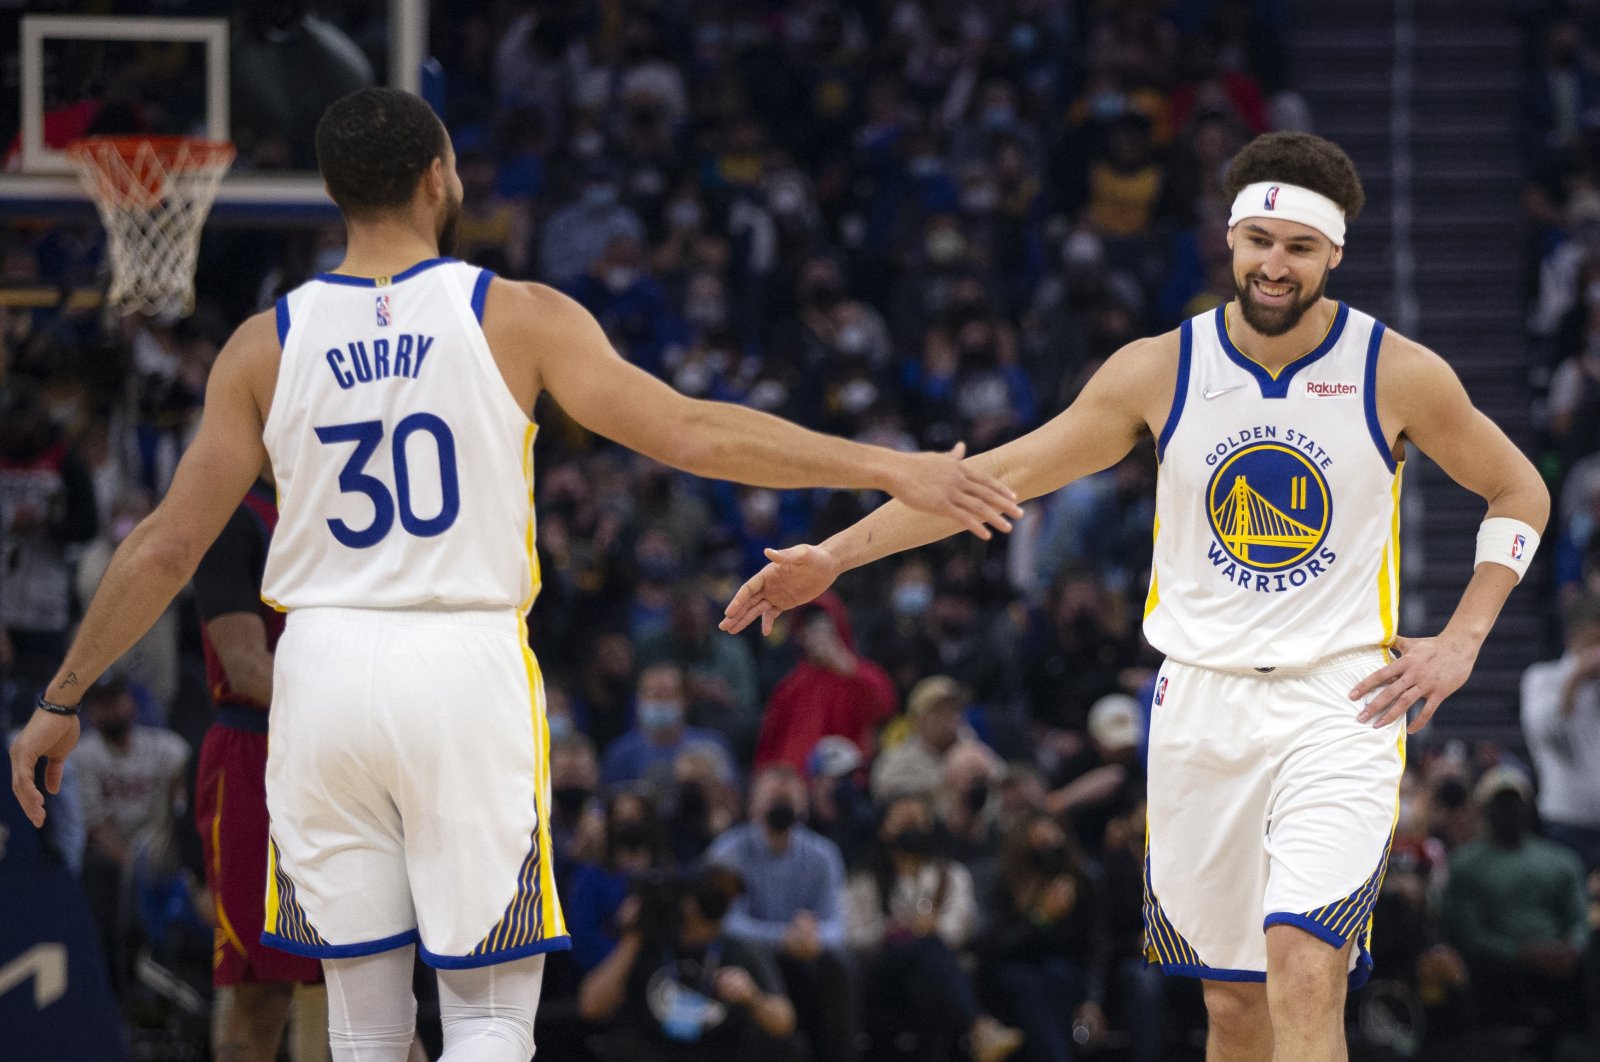 Golden State Warriors guard Klay Thompson (R) gets a congratulatory handshake from teammate Stephen Curry (L) after making a basket in an NBA game against the Cleveland Cavaliers, San Francisco, California, U.S., Jan. 9, 2022. (Reuters Photo)